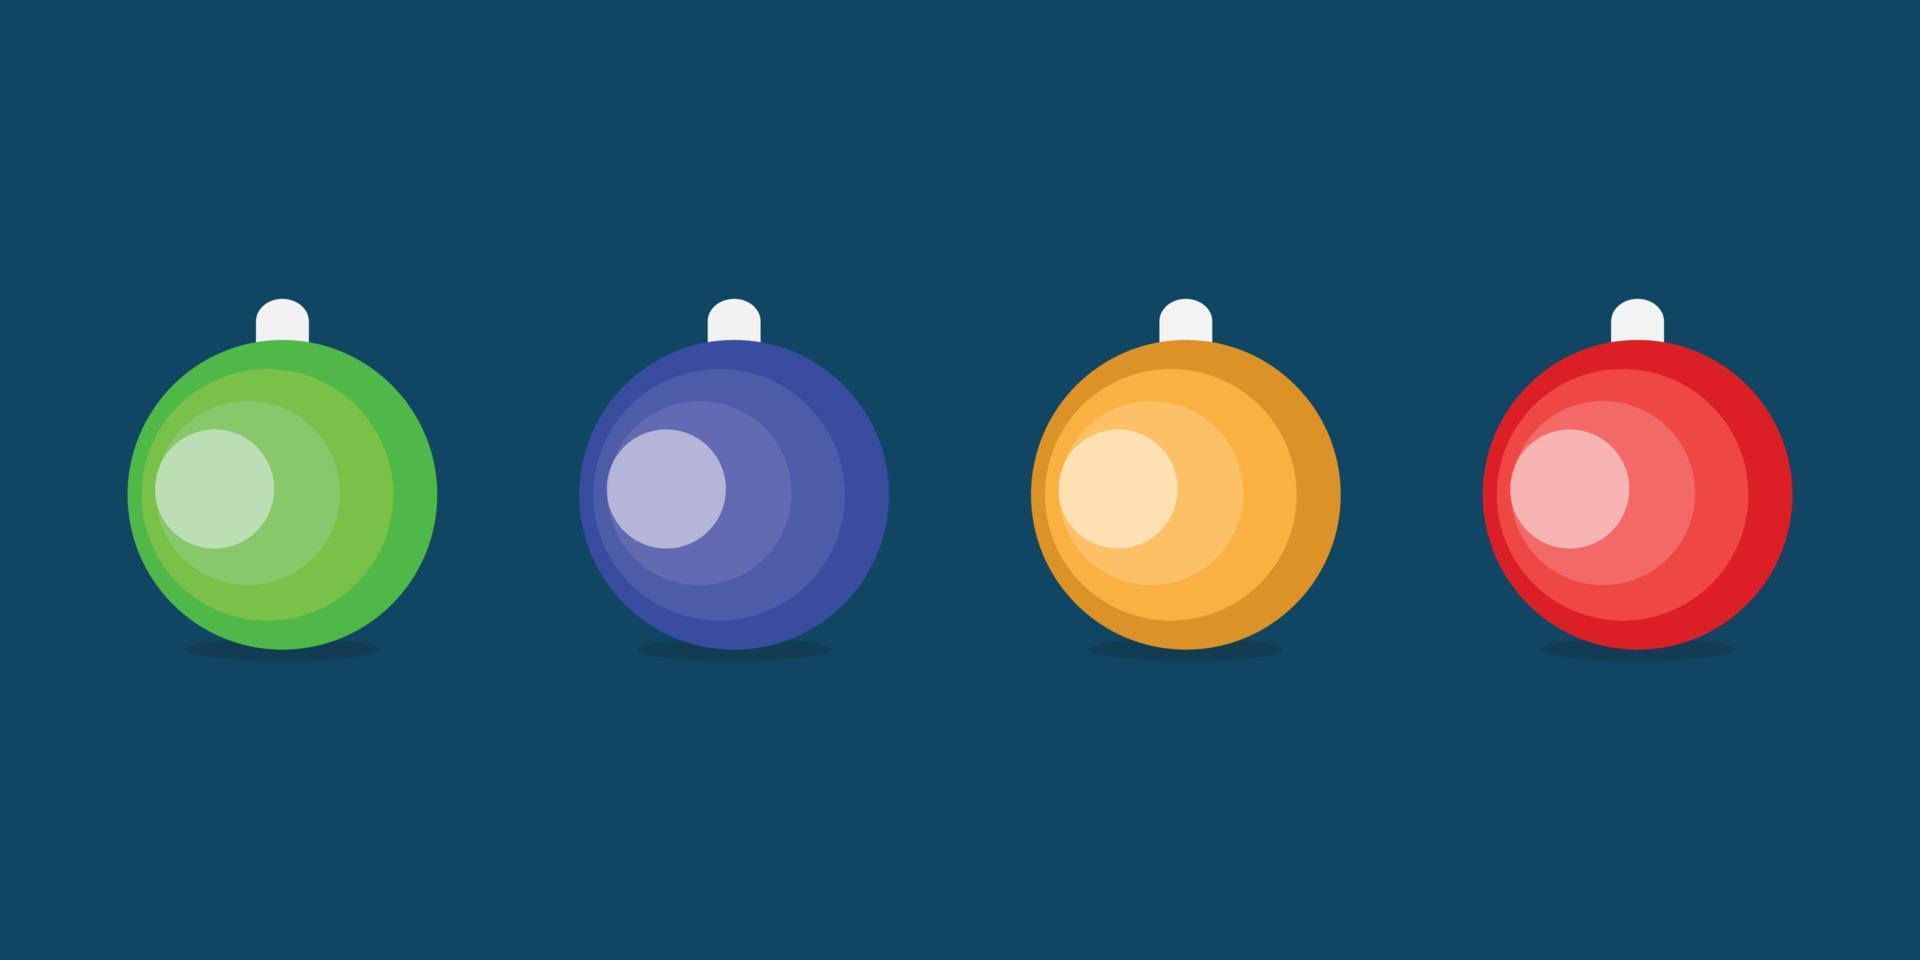 Christmas Ornaments collection. Set of Christmas Balls Decorations vector